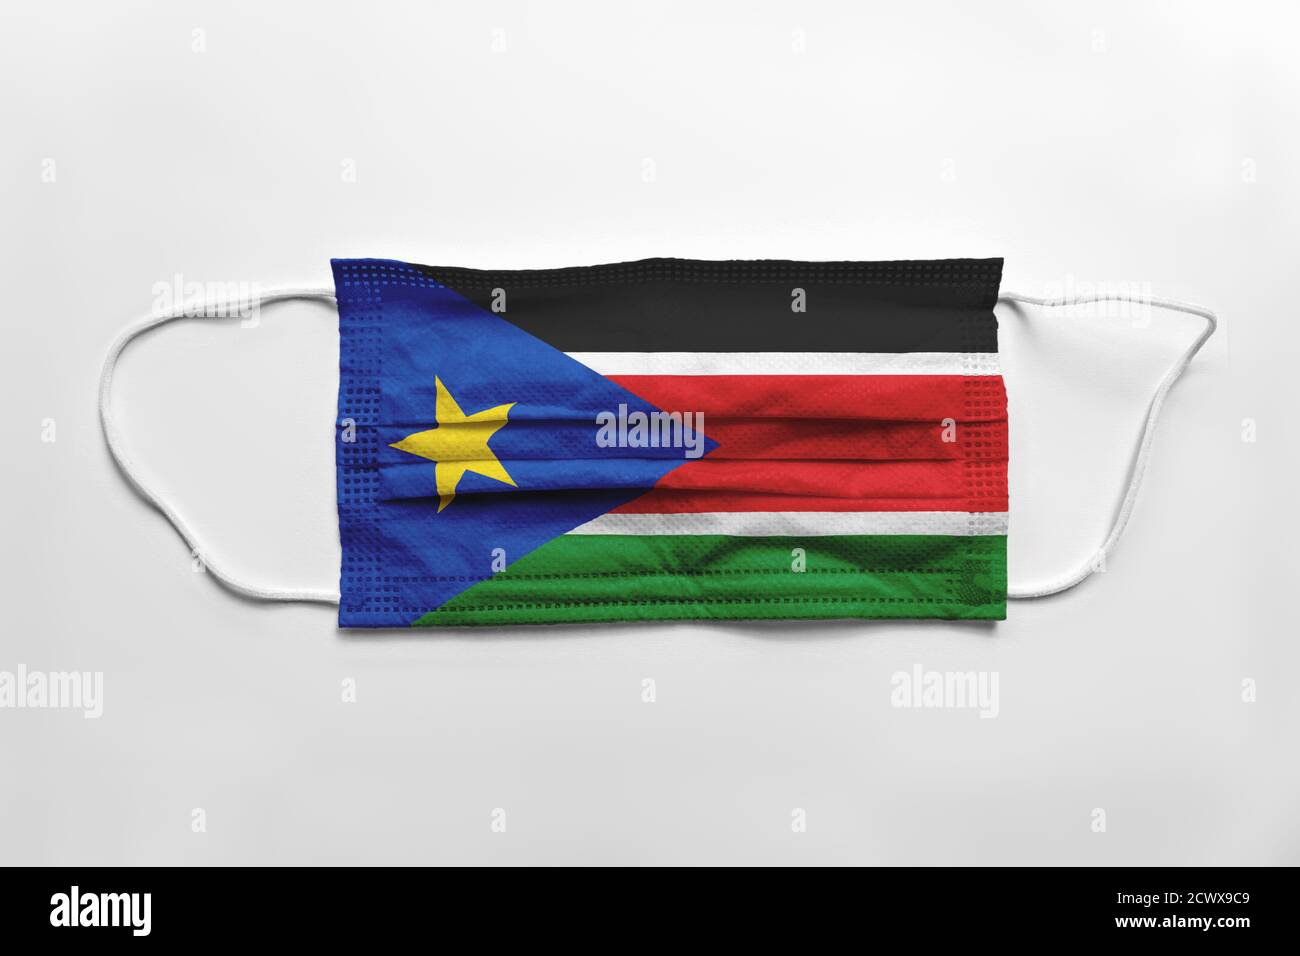 Face mask with South Sudan flag printed, on white background, isolated. Covid-19 concept. Stock Photo